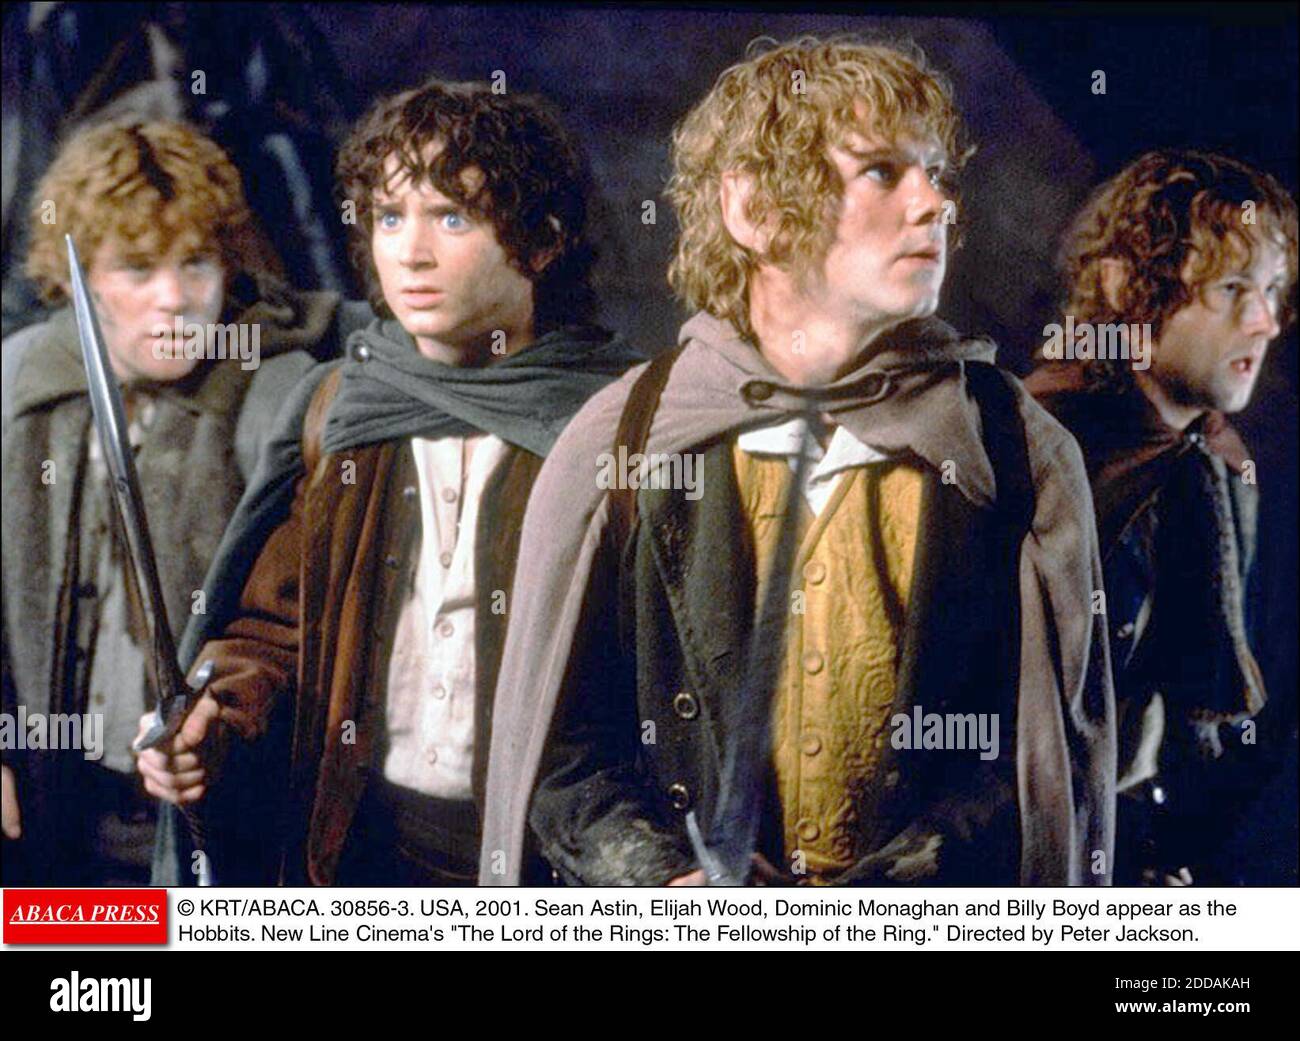 NO FILM, NO VIDEO, NO TV, NO DOCUMENTARY - © KRT/ABACA. 30856-3. USA, 2001. Sean Astin, Elijah Wood, Dominic Monaghan and Billy Boyd appear as the Hobbits. New Line Cinema's The Lord of the Rings: The Fellowship of the Ring. Directed by Peter Jackson. Stock Photo